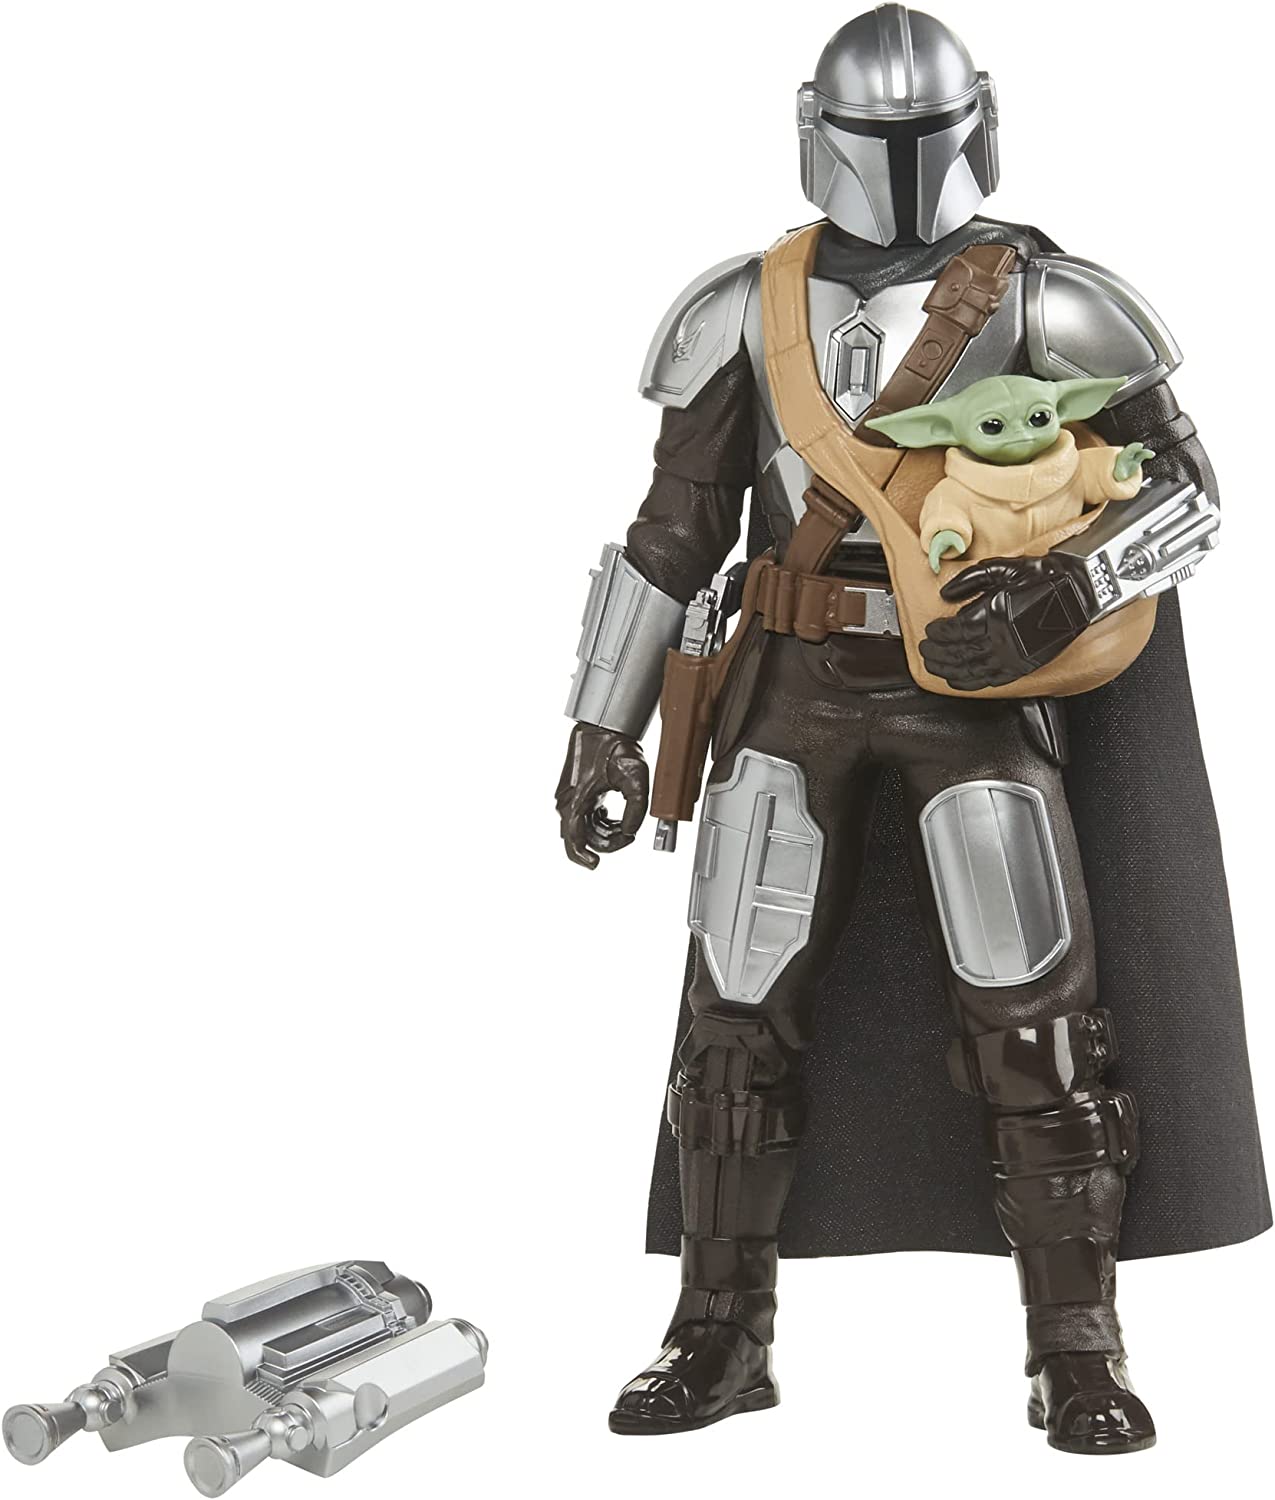 Star Wars Galactic Action The Mandalorian & Grogu Interactive Electronic 12-Inch-Scale Action Figures, Toys for Kids Ages 4 and Up